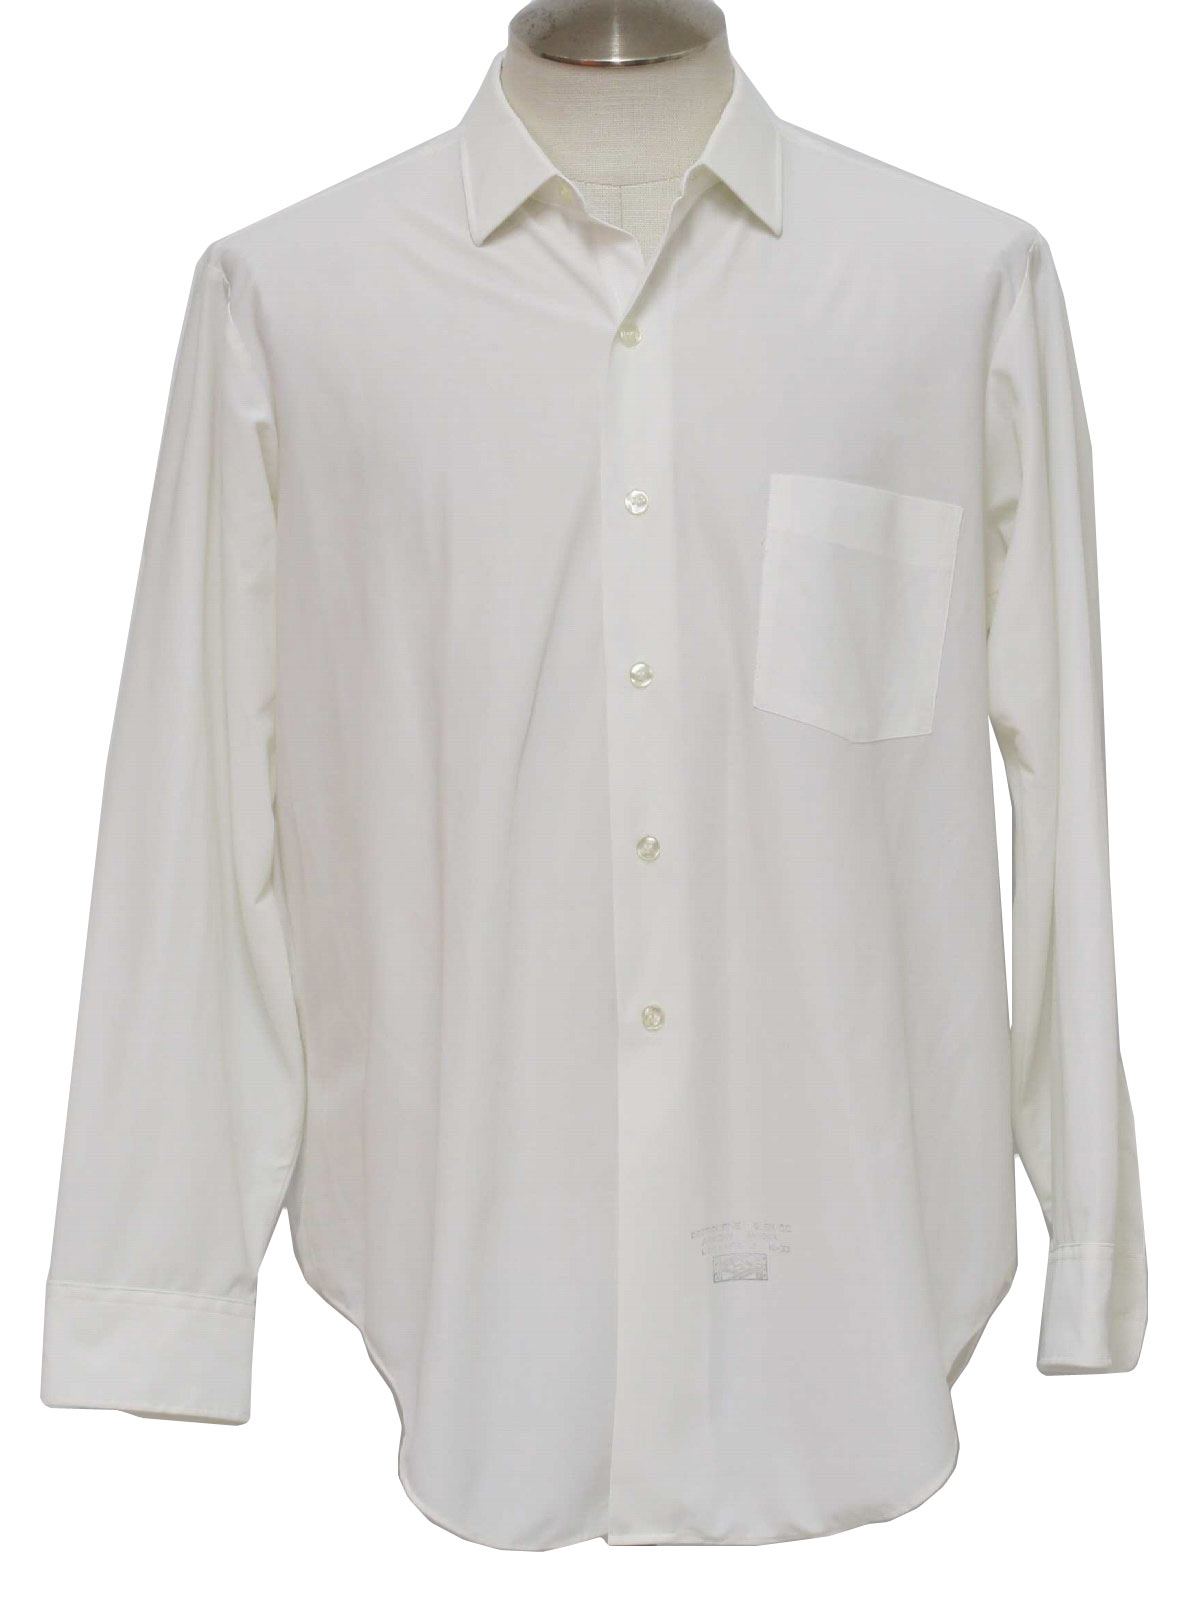 Retro 1960s Shirt: Early60s -Manhattan- Mens white polyester tricot mod ...